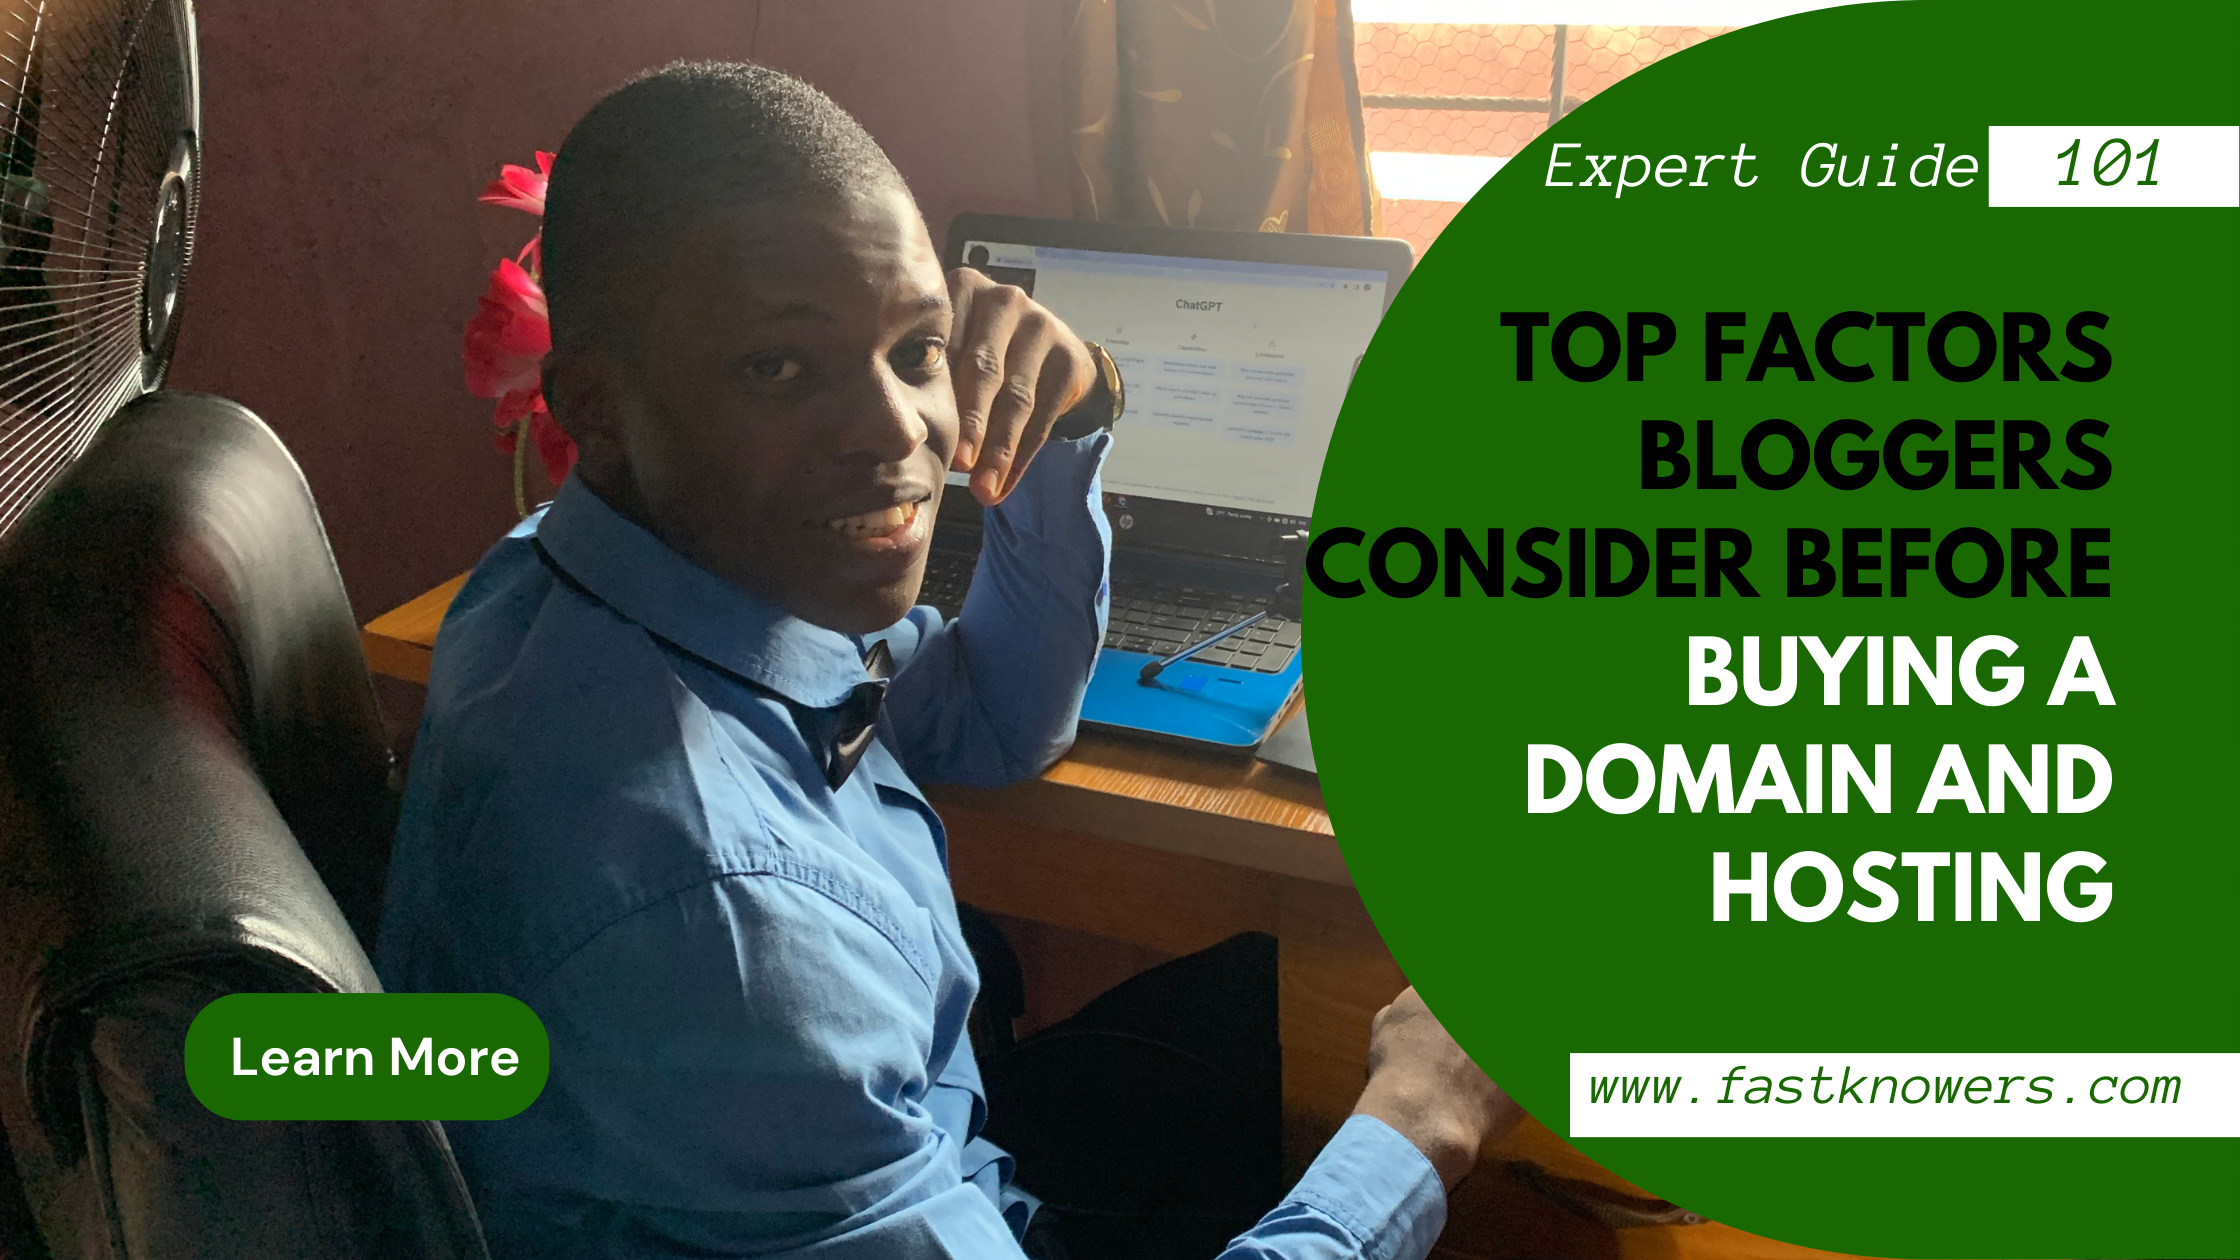 Top factors bloggers consider before buying a domain and hosting